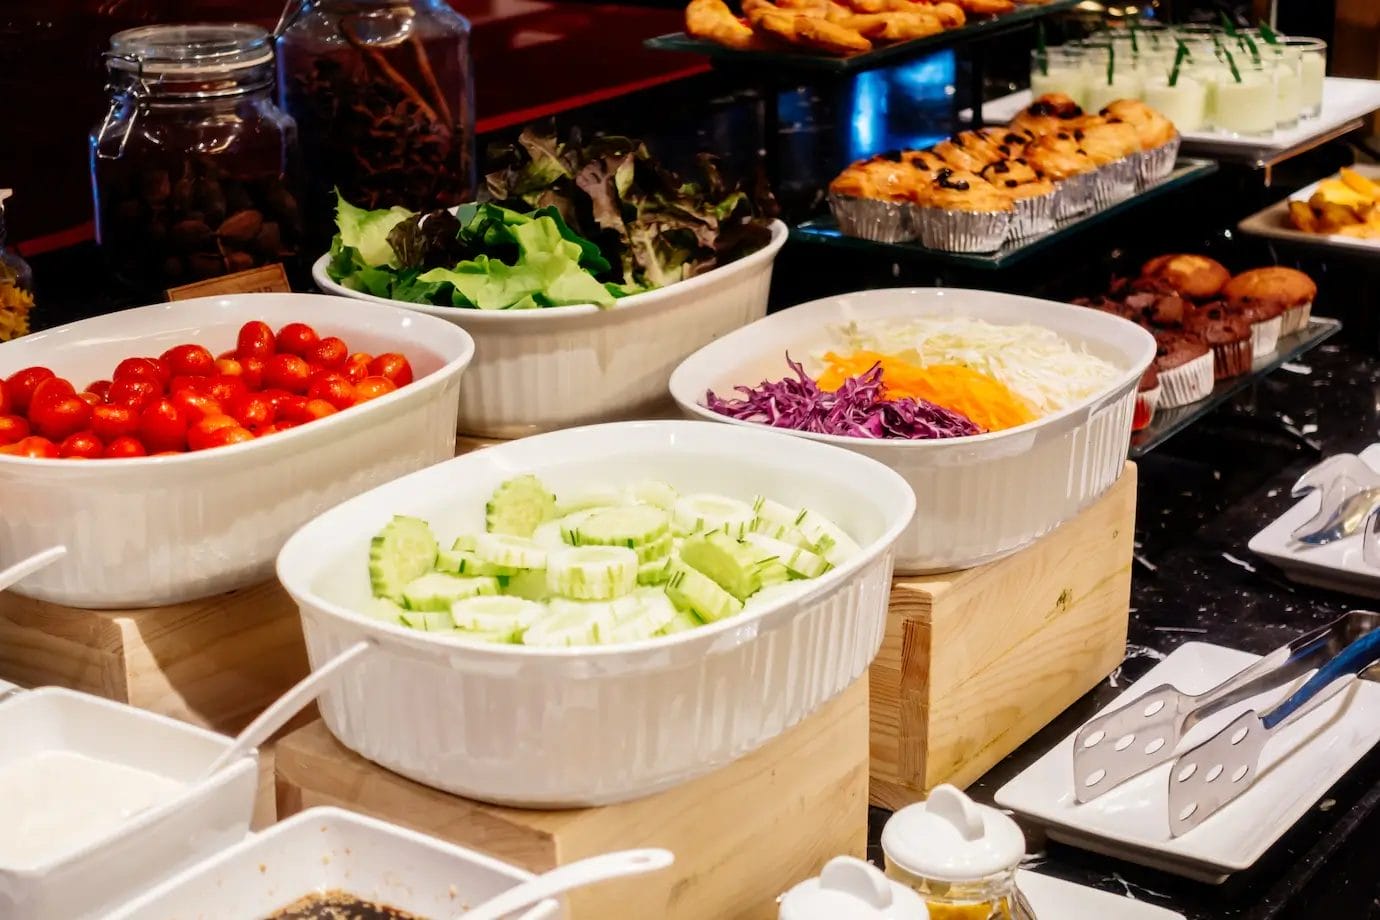 Awesome Catering Food Ideas to Serve on Your Upcoming Big Event